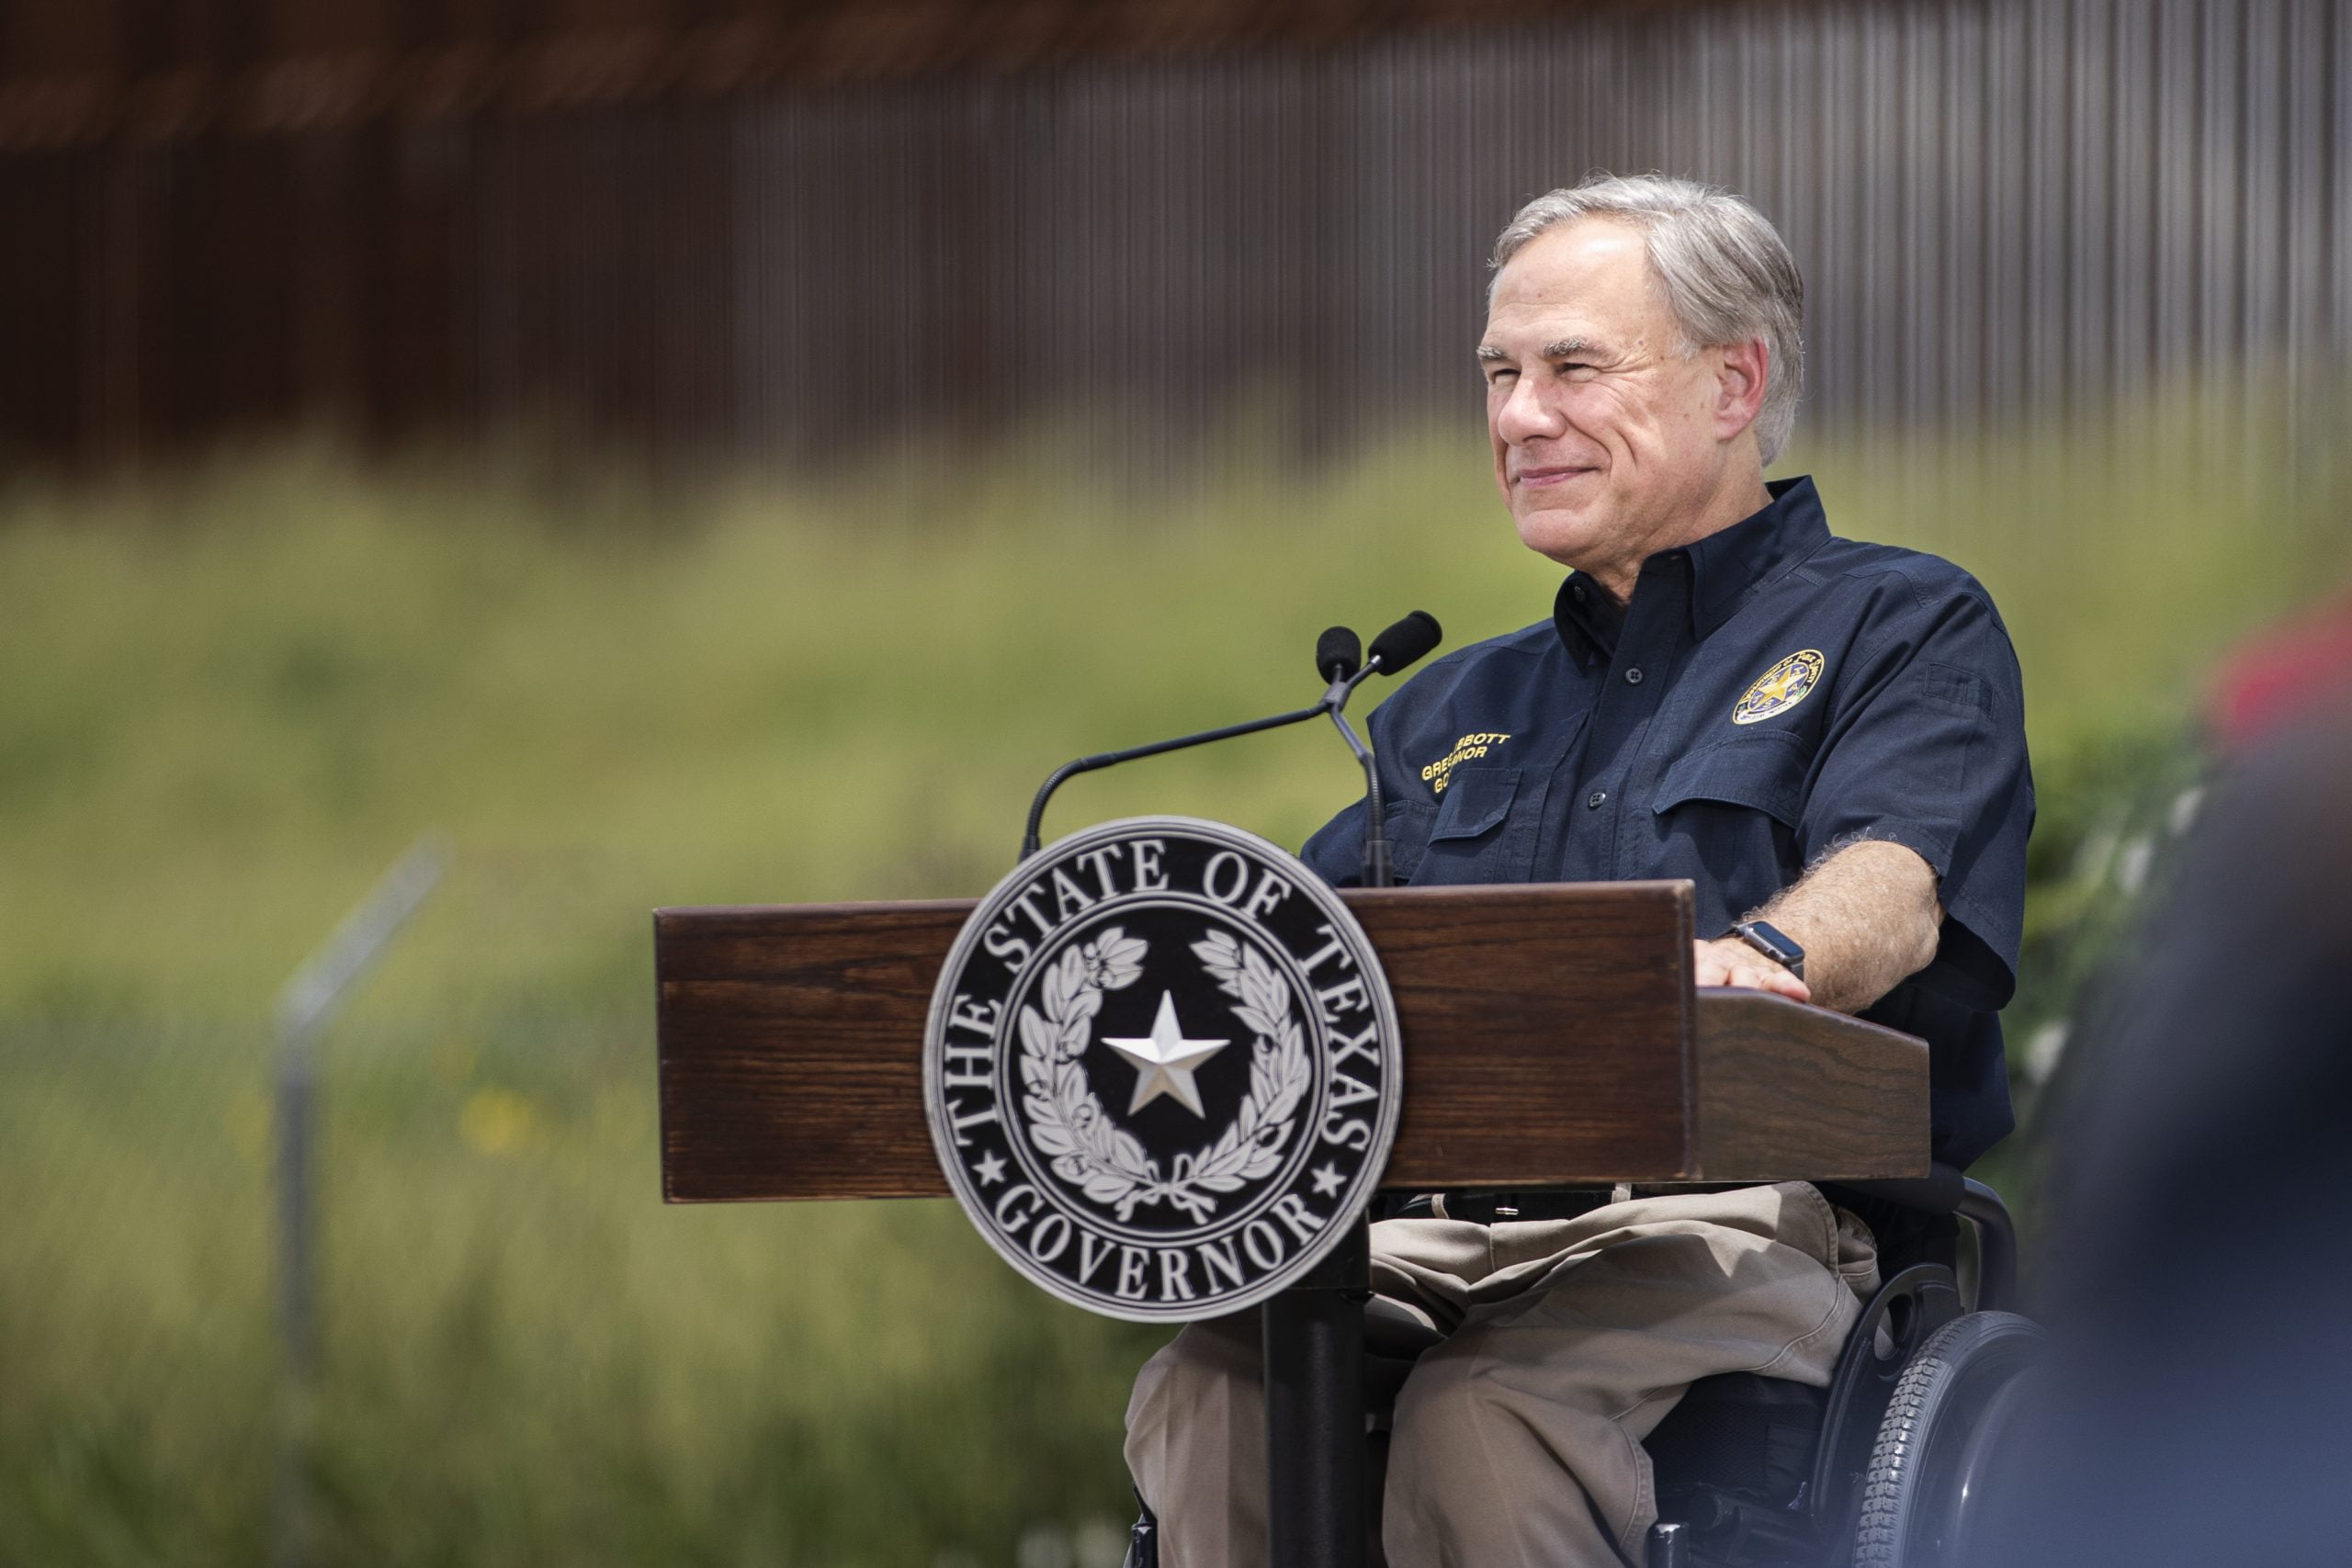 <div>Gov. Abbott campaigns in South Texas: 'We're going to save America by winning Texas'</div> 6